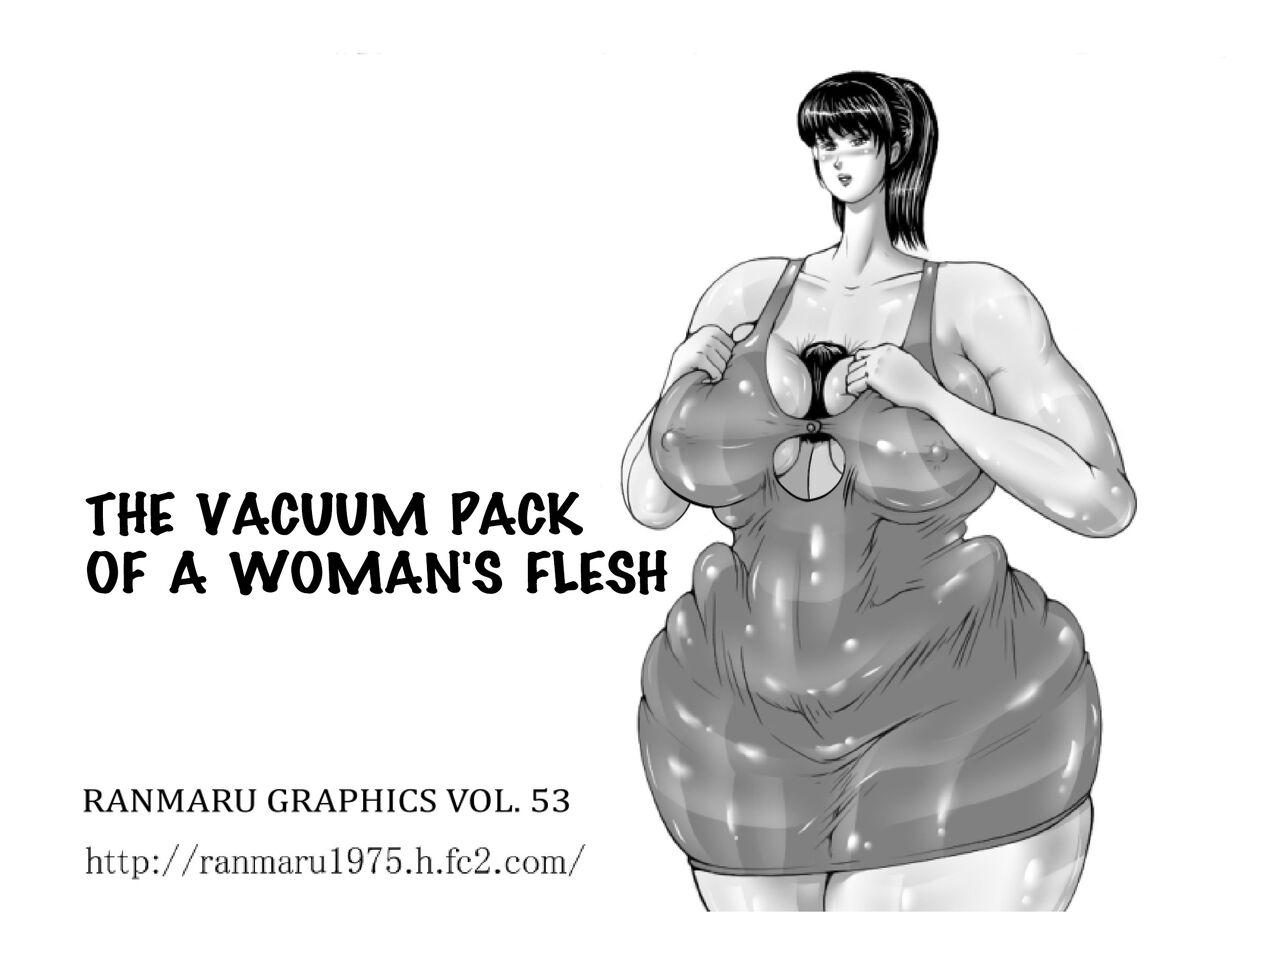 Harcore The Vacuum Pack Of A Woman's Flesh Morocha - Picture 1